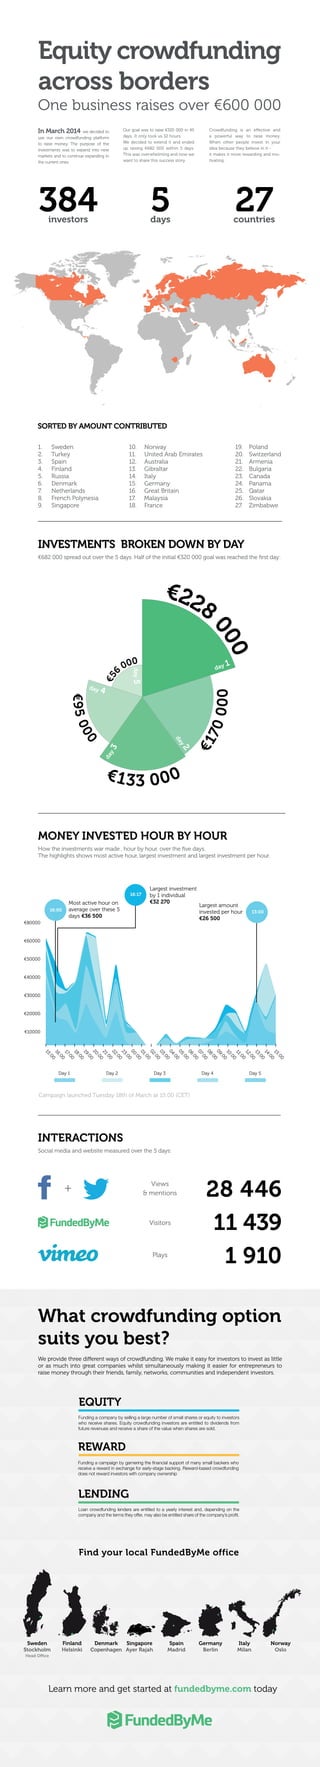 Equity crowdfunding 
across borders 
One business raises over €600 000 
Our goal was to raise €320 000 in 45 
days. It only took us 32 hours. 
We decided to extend it and ended 
up raising €682 000 within 5 days. 
This was overwhelming and now we 
want to share this success story. 
Crowdfunding is an effective and 
a powerful way to raise money. 
When other people invest in your 
idea because they believe in it - 
it makes it more rewarding and mo-tivating. 
384 
investors 27 countries 5days 
SORTED BY AMOUNT CONTRIBUTED 
INVESTMENTS BROKEN DOWN BY DAY 
€682 000 spread out over the 5 days. Half of the initial €320 000 goal was reached the first day: 
€228 000 
€56 000 
day 5 
day 4 
day 3 
day 2 
€133 000 
day 1 
€170 000 
€95 000 
MONEY INVESTED HOUR BY HOUR 
How the investments war made , hour by hour, over the five days. 
The highlights shows most active hour, largest investment and largest investment per hour. 
18:00 
20:00 
22:00 
02:00 
04:005:006:00 
08:00 
12:00 
Day 1 Day 2 Day 3 Day 4 Day 5 
€80000 
€60000 
€50000 
€40000 
€30000 
€20000 
Campaign launched Tuesday 18th of March at 15:00 (CET) 
INTERACTIONS 
Social media and website measured over the 5 days: 
+ 
Views 
& mentions 
Visitors 
14:00 
28 446 
11 439 
Plays 1 910 
In March 2014 we decided to 
use our own crowdfunding platform 
to raise money. The purpose of the 
investments was to expand into new 
markets and to continue expanding in 
the current ones. 
What crowdfunding option 
suits you best? 
We provide three different ways of crowdfunding. We make it easy for investors to invest as little 
or as much into great companies whilst simultaneously making it easier for entrepreneurs to 
raise money through their friends, family, networks, communities and independent investors. 
EQUITY 
Funding a company by selling a large number of small shares or equity to investors 
who receive shares. Equity crowdfunding investors are entitled to dividends from 
future revenues and receive a share of the value when shares are sold. 
REWARD 
Funding a campaign by garnering the financial support of many small backers who 
receive a reward in exchange for early-stage backing. Reward-based crowdfunding 
does not reward investors with company ownership 
LENDING 
Loan crowdfunding lenders are entitled to a yearly interest and, depending on the 
company and the terms they offer, may also be entitled share of the company’s profit. 
Find your local FundedByMe office 
Sweden 
Stockholm 
Head Office 
Finland 
Helsinki 
Denmark 
Copenhagen 
Spain 
Madrid 
Germany 
Berlin 
Italy 
Milan 
Singapore 
Ayer Rajah 
Norway 
Oslo 
Learn more and get started at fundedbyme.com today 
€10000 
15:00 
16:00 
17:00 
19:00 
21:00 
23:000:00 
01:00 
03:00 
07:00 
09:00 
10:00 
11:00 
13:00 
15:00 
Largest amount 
invested per hour 
€26 500 
Most active hour on 
average over these 5 
days €36 500 
Largest investment 
by 1 individual 
€32 270 
16:00 
16:17 
13:00 
1. Sweden 
2. Turkey 
3. Spain 
4. Finland 
5. Russia 
6. Denmark 
7. Netherlands 
8. French Polynesia 
9. Singapore 
10. Norway 
11. United Arab Emirates 
12. Australia 
13. Gibraltar 
14. Italy 
15. Germany 
16. Great Britain 
17. Malaysia 
18. France 
19. Poland 
20. Switzerland 
21. Armenia 
22. Bulgaria 
23. Canada 
24. Panama 
25. Qatar 
26. Slovakia 
27. Zimbabwe 
